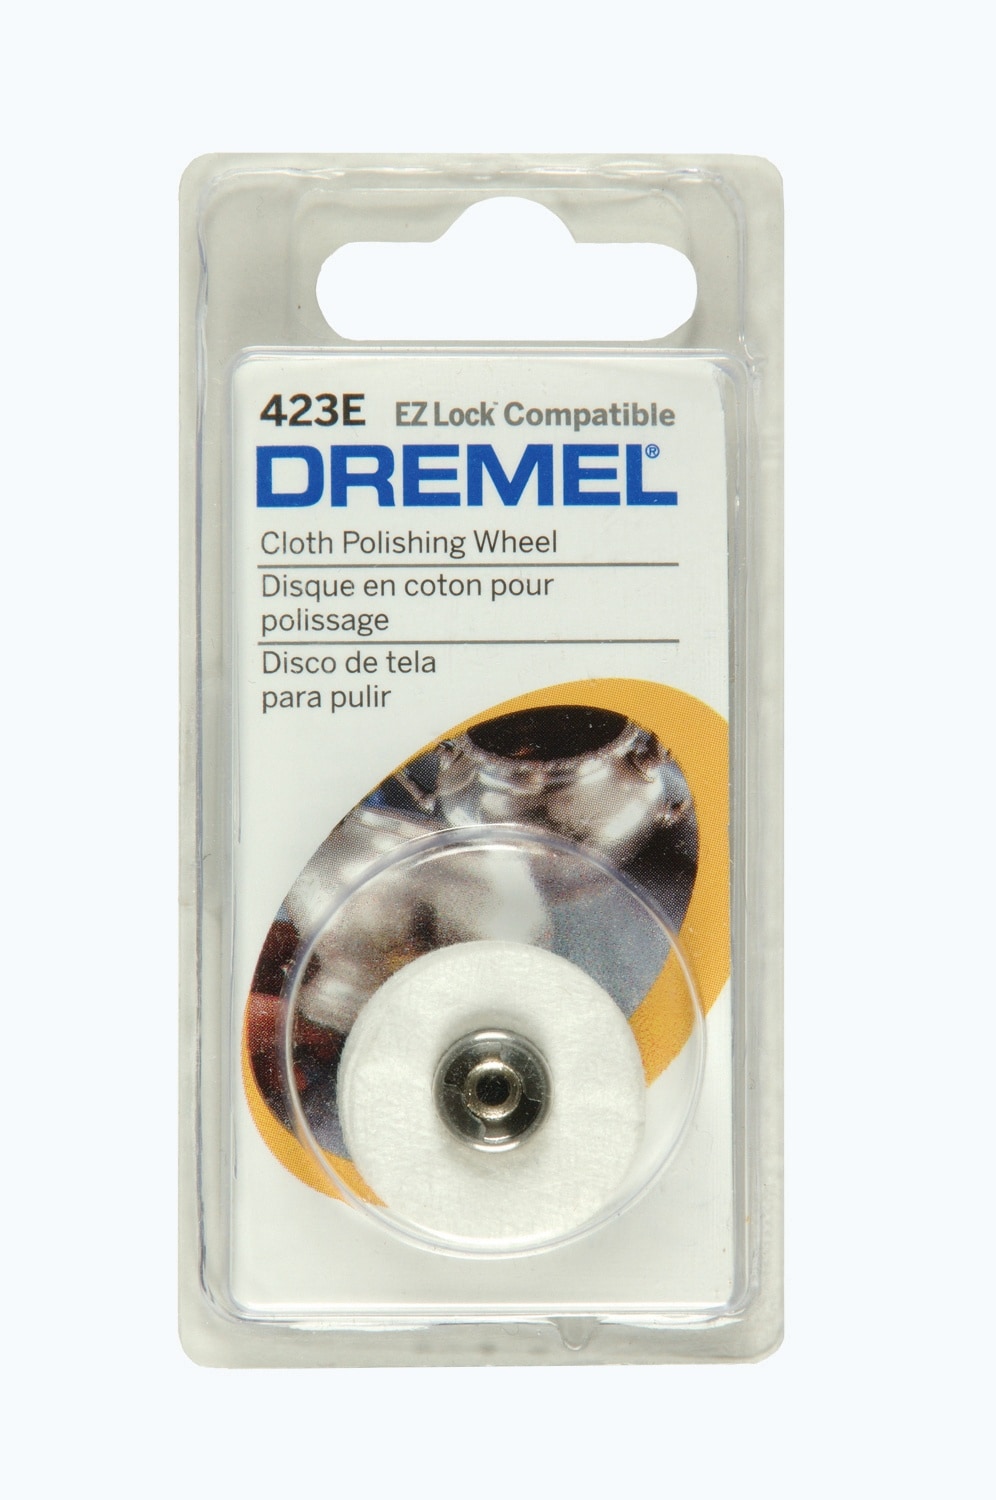 WORKEASE Chrome Polish Buffing Wheels for Drill, Include Cloth